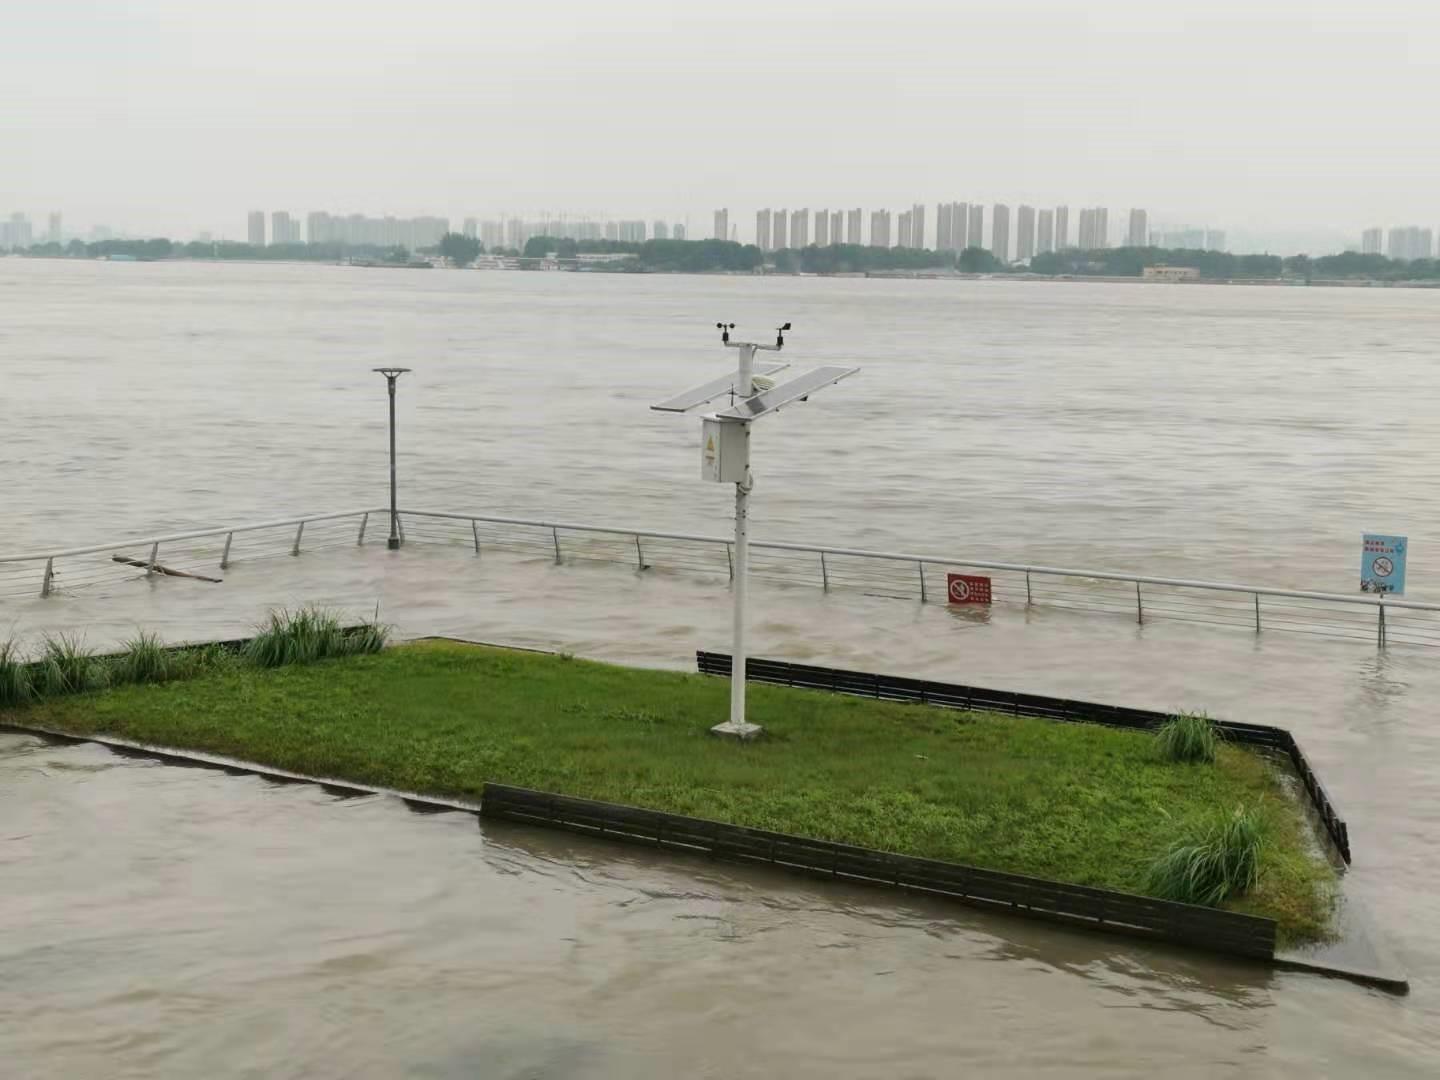 Automatic weather station near the Yangtze River in Nanjing, which flooded on 23 July 2020